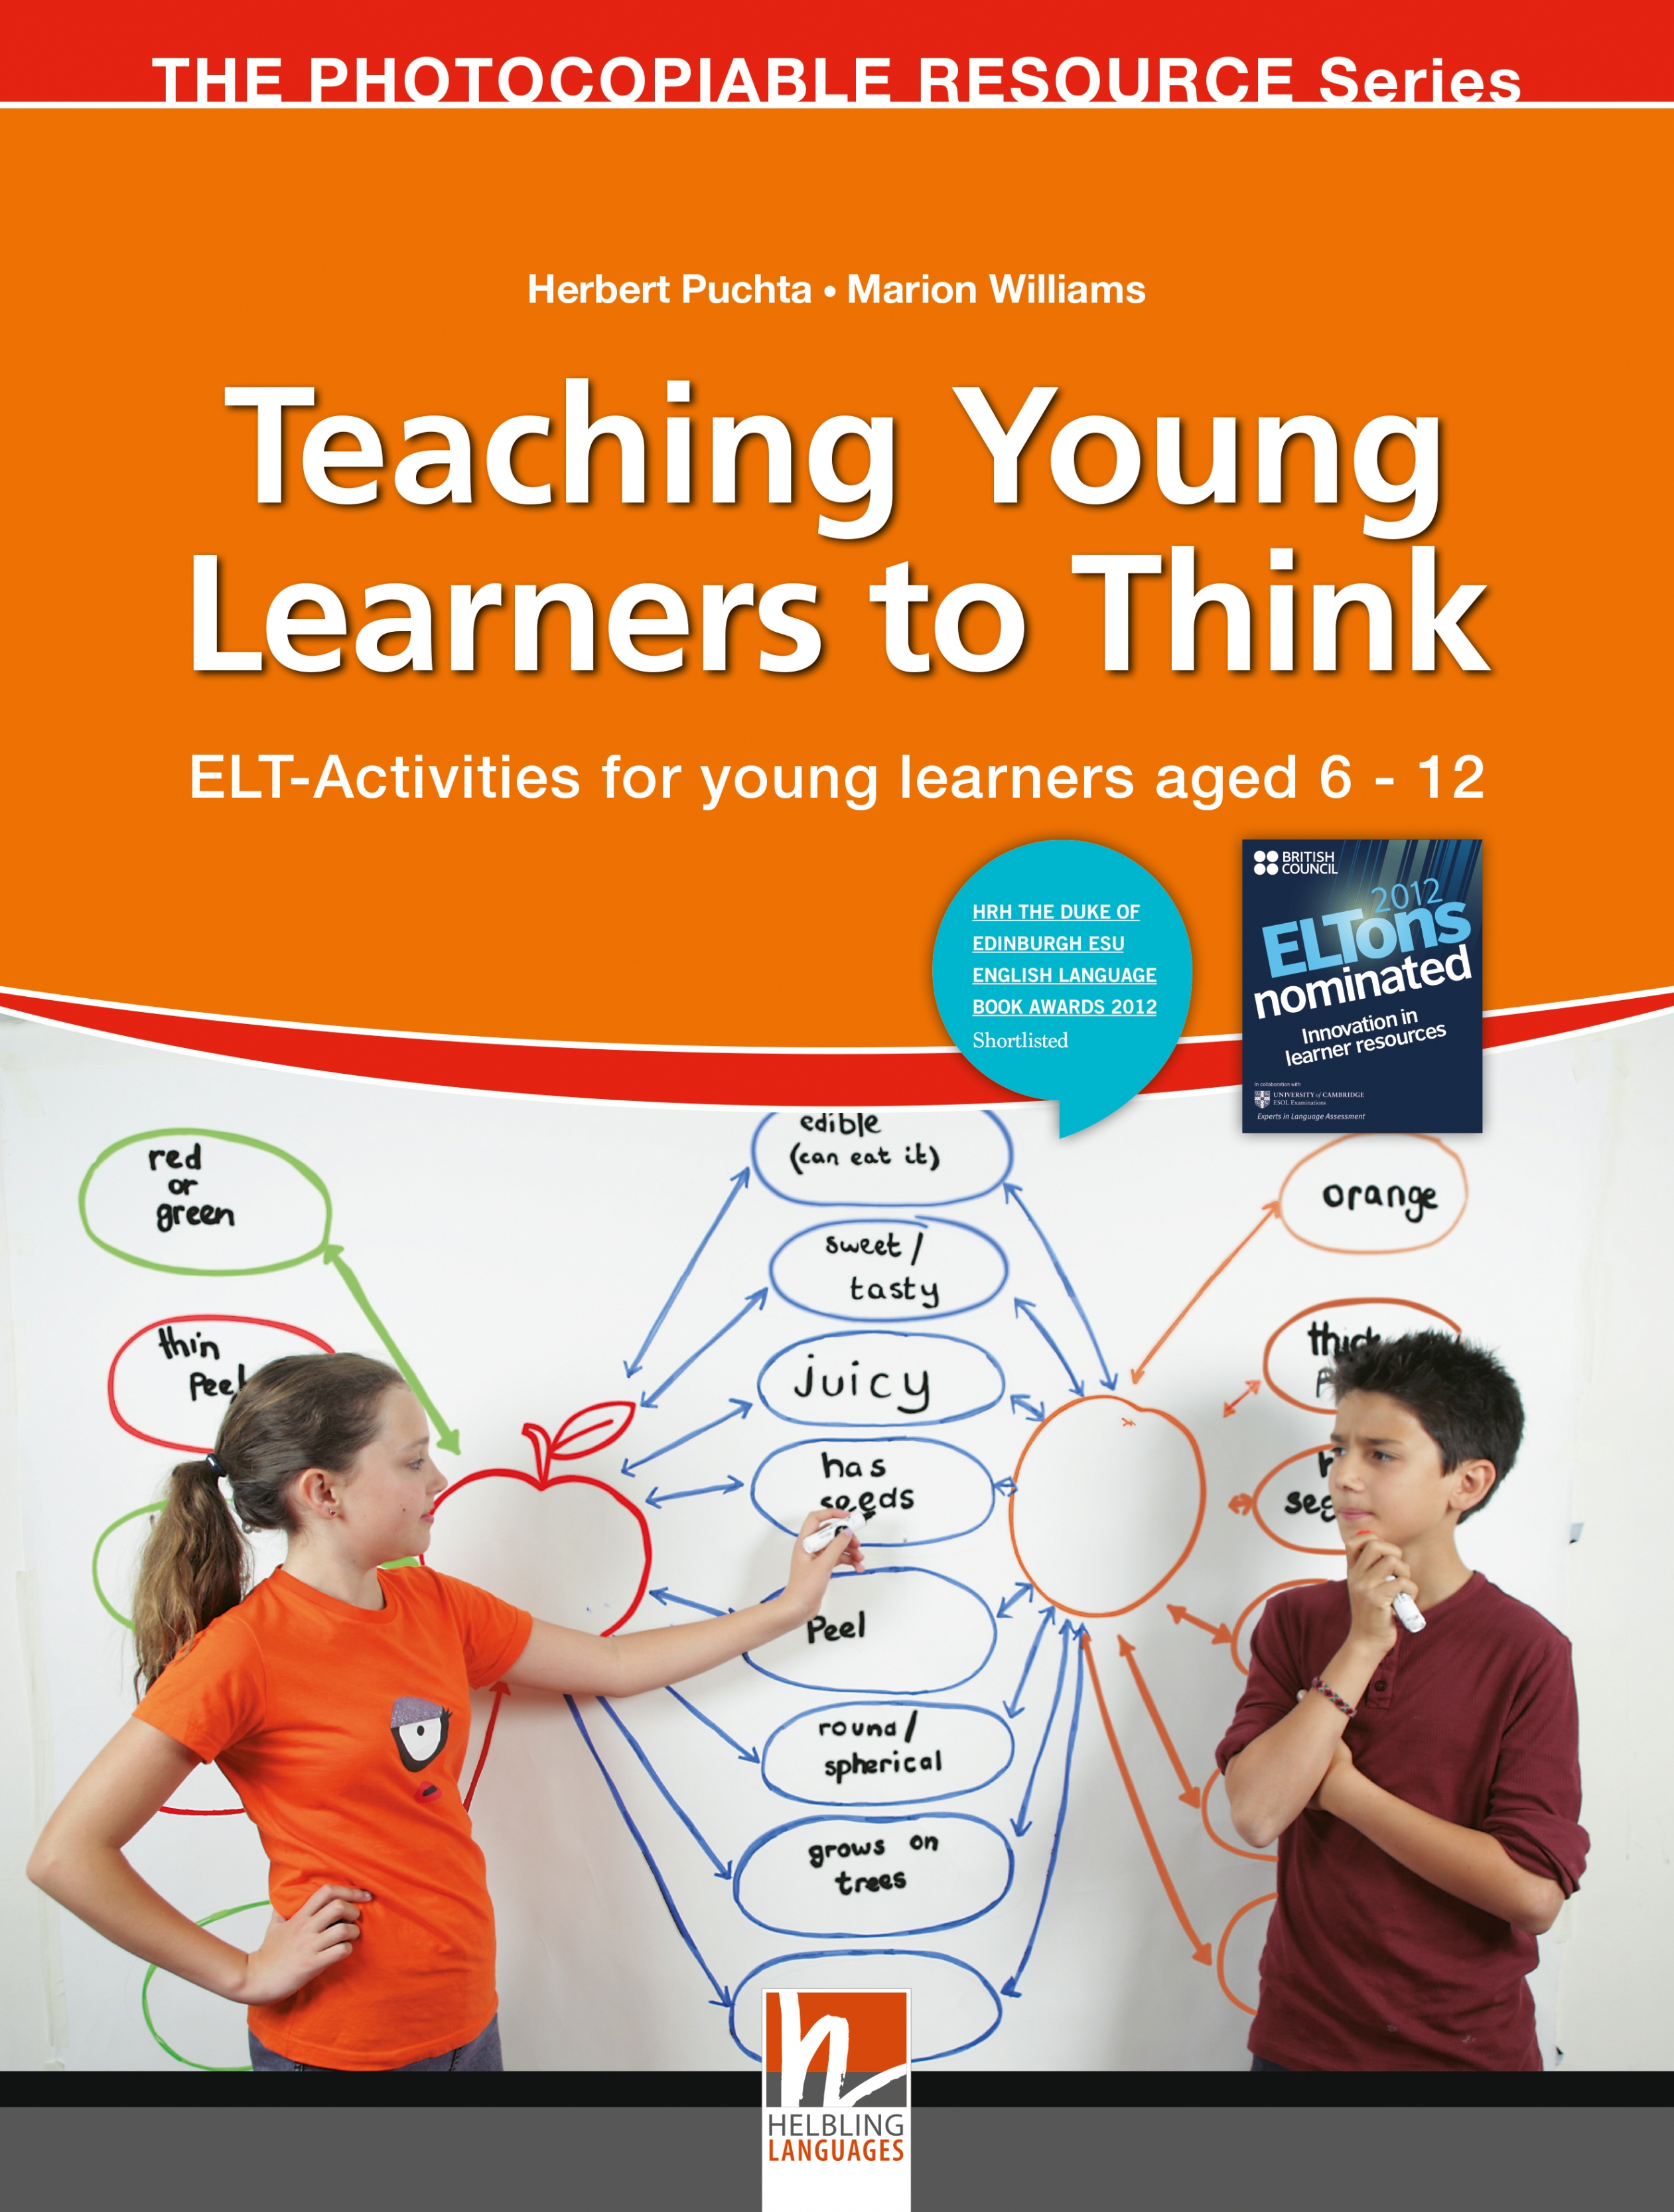 Herbert P., Marion W. Teaching Young Learners to Think 